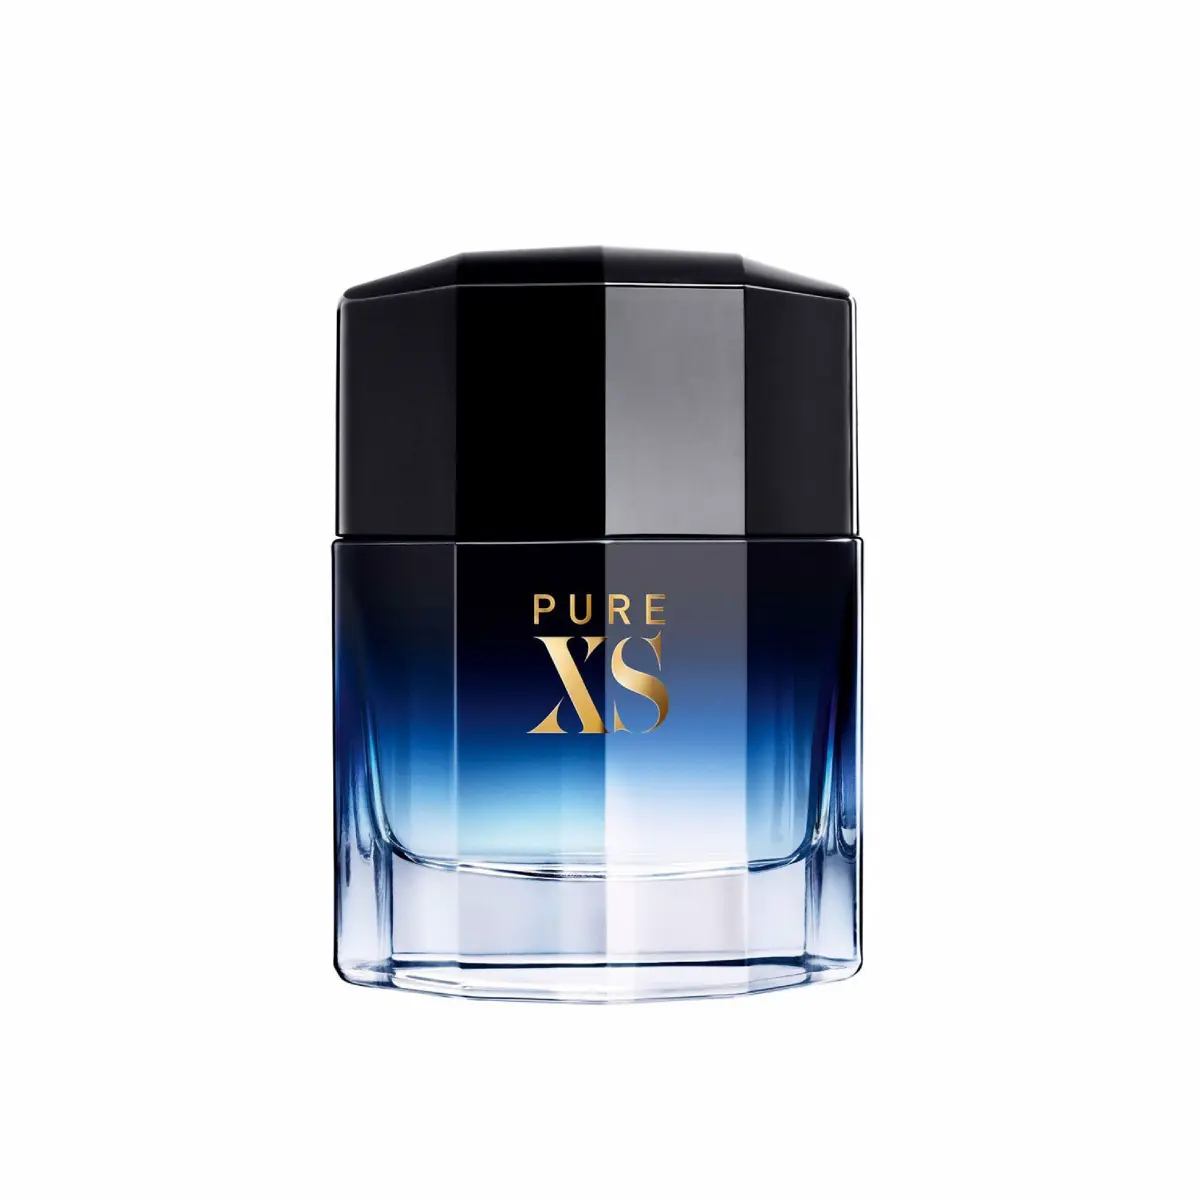 Paco Rabanne Pure XS For Men